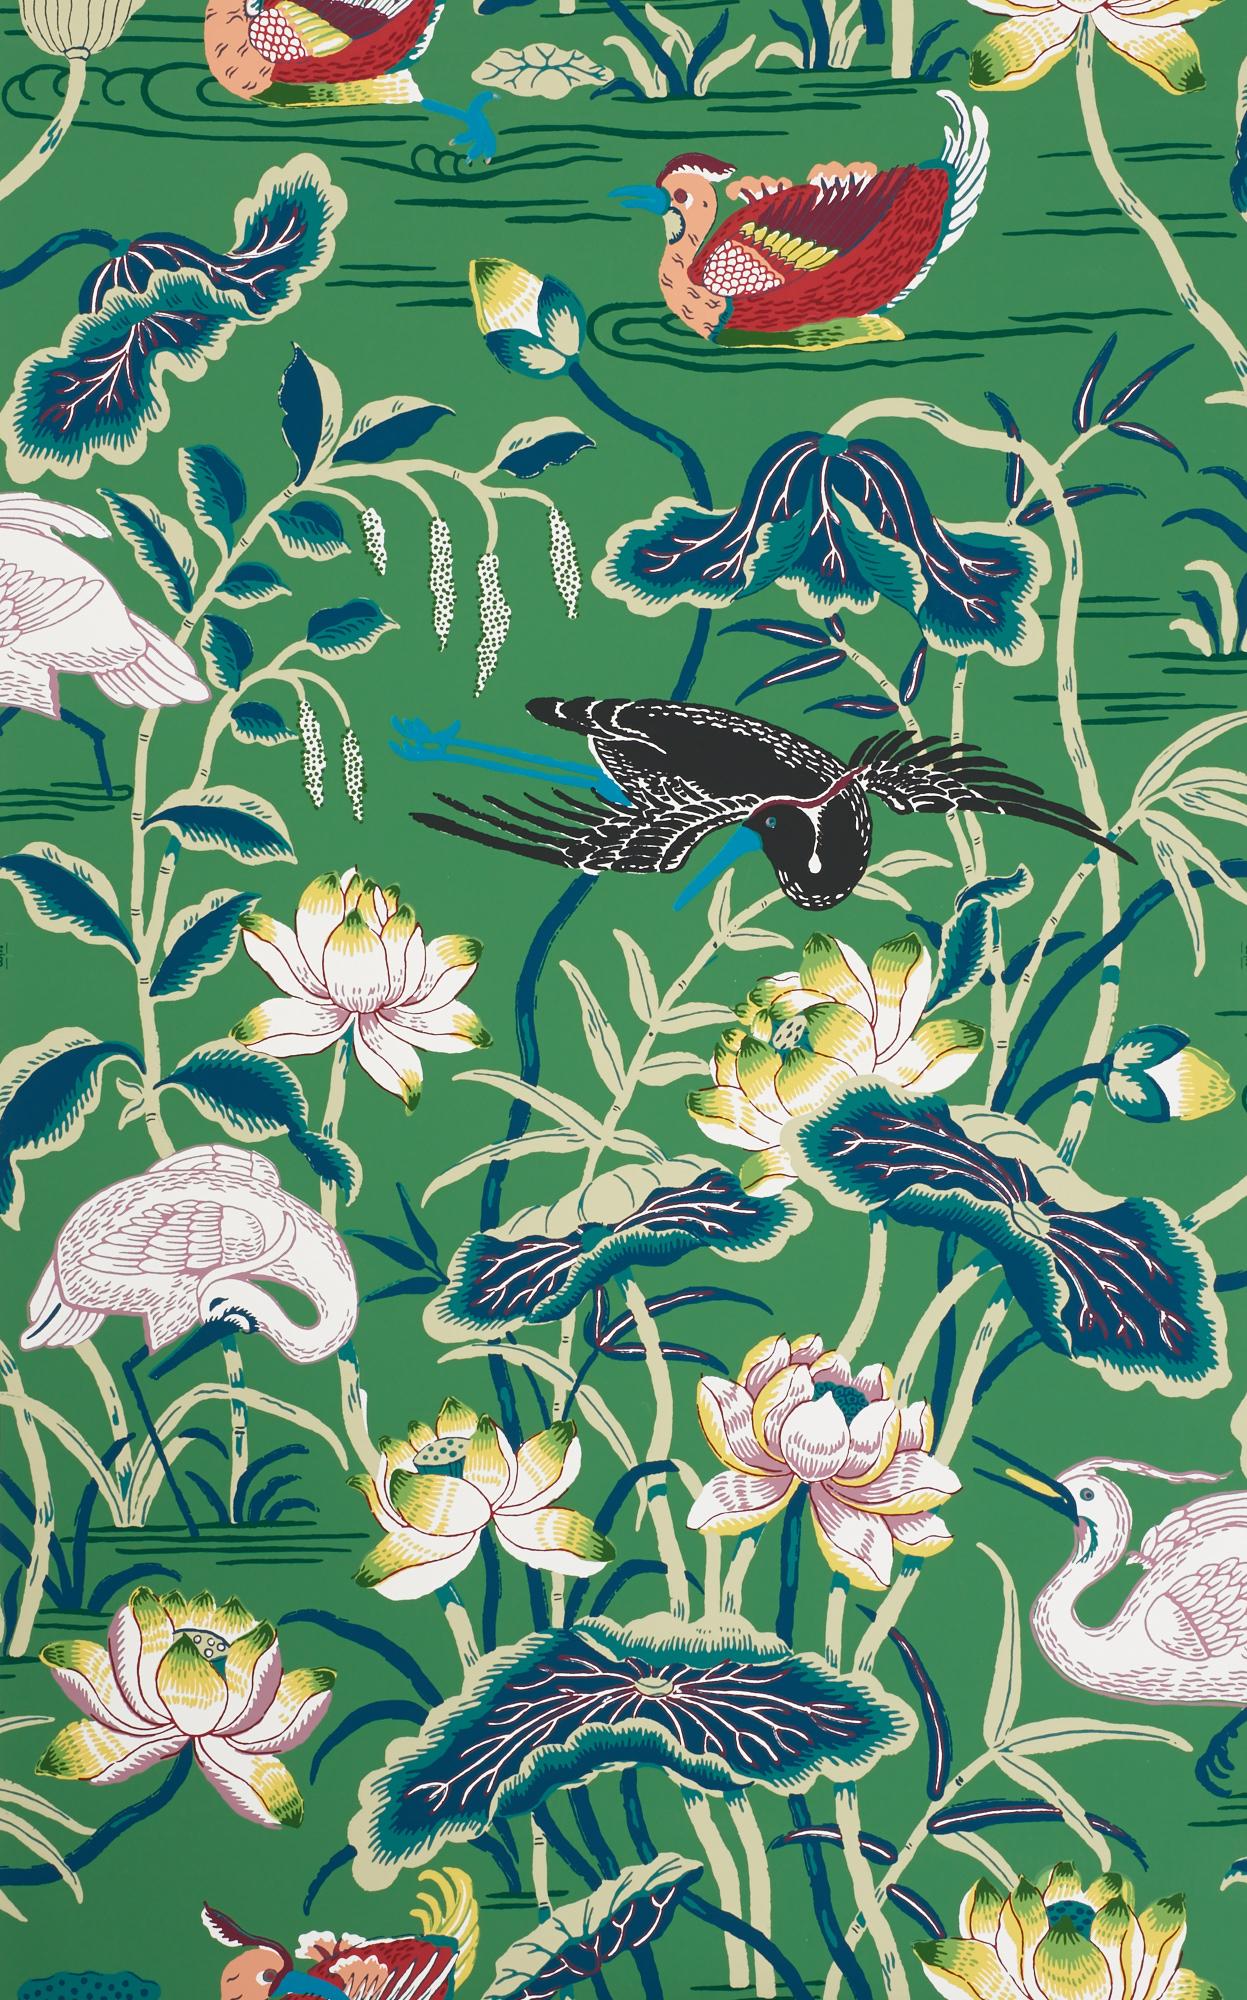 This enchanting pattern, recreated from a 1920s document in our archives, is an ode to Japanese natural motifs.

Since Schumacher was founded in 1889, our family-owned company has been synonymous with style, taste, and innovation. A passion for